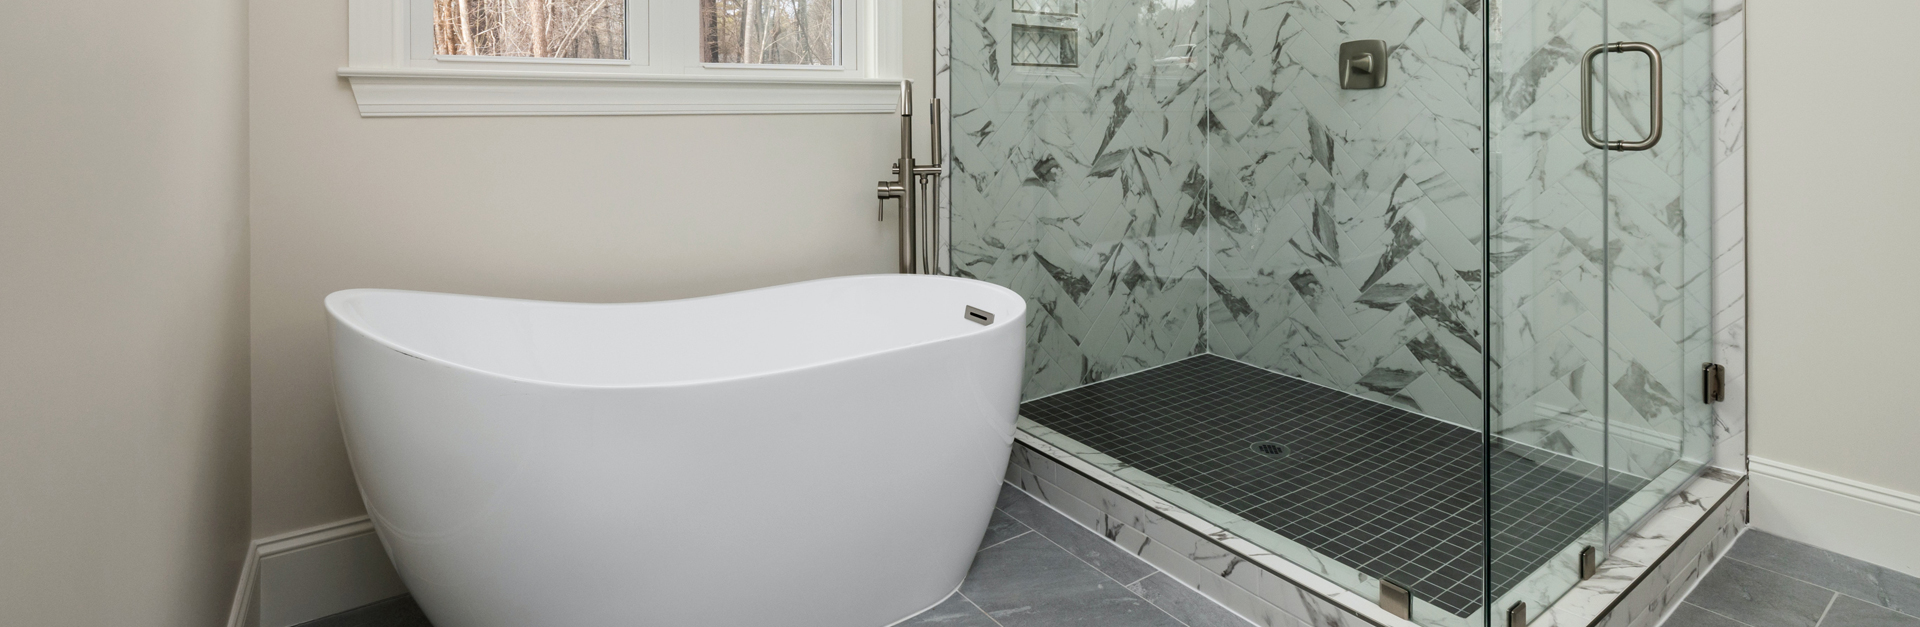 How To Estimate Tile For Shower A, How To Calculate Much Tile You Need For A Shower